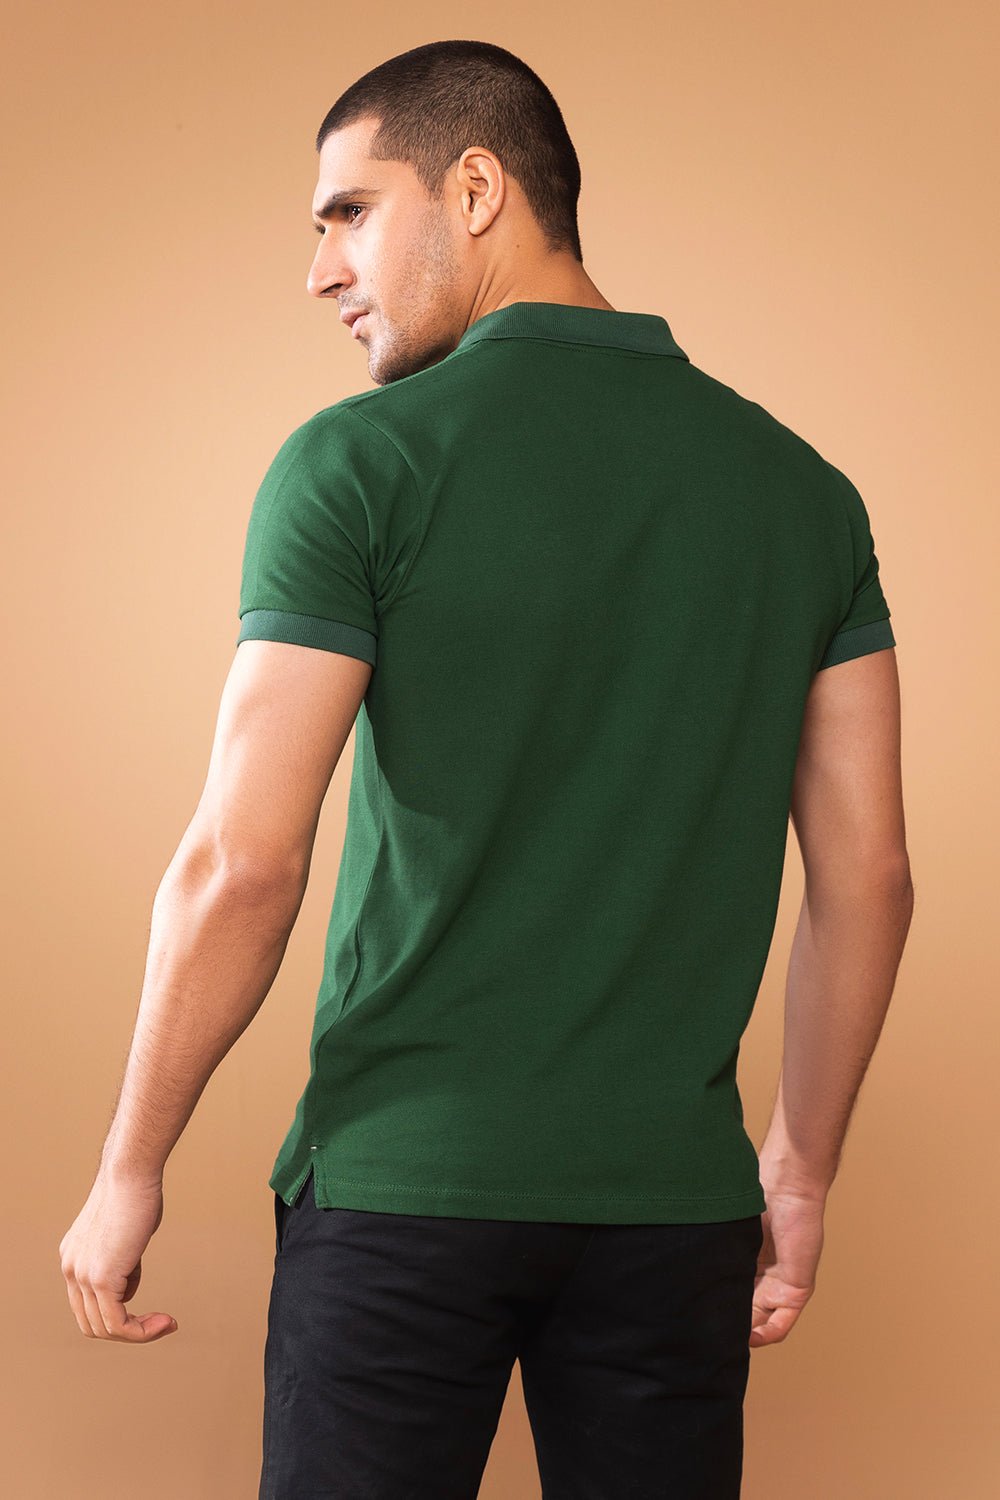 Bottle Green Polo Shirt - MHW Clothing